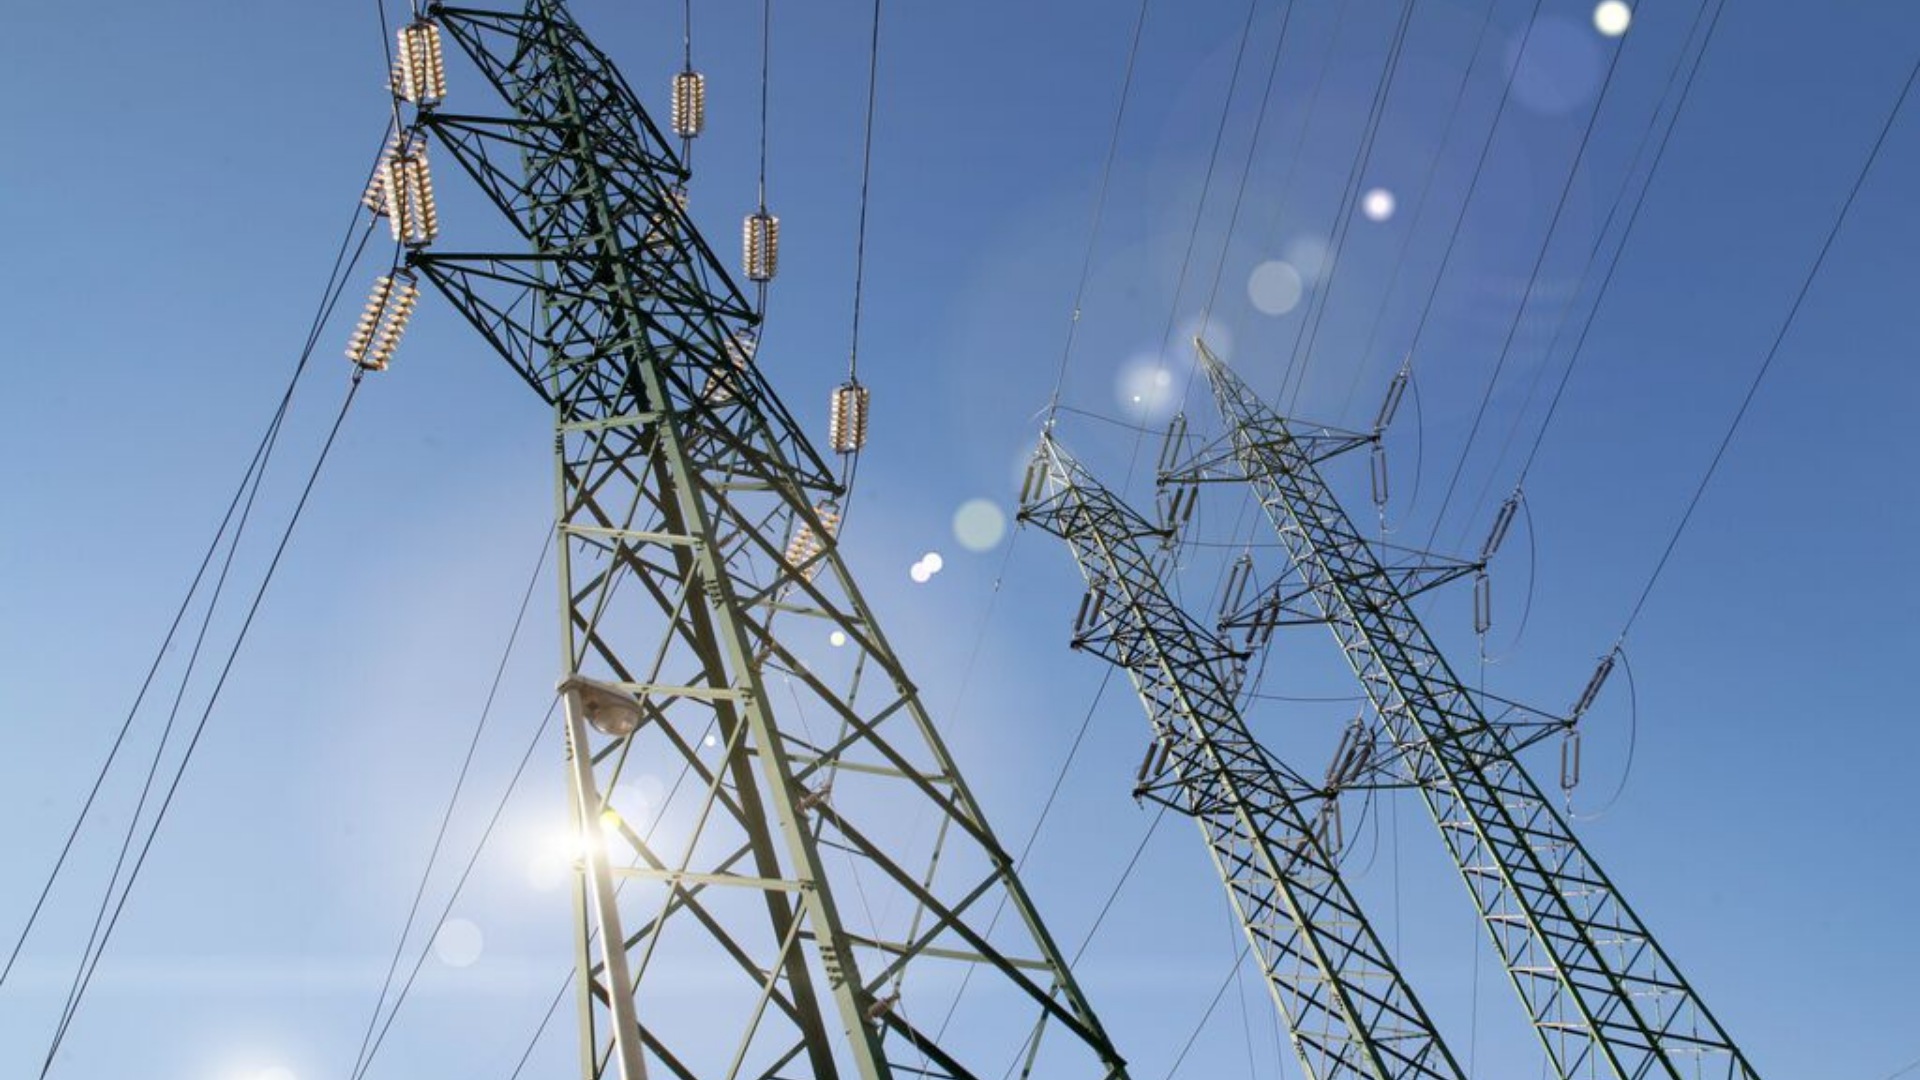 UK electricity pylon distributing power to businesses and homes. card